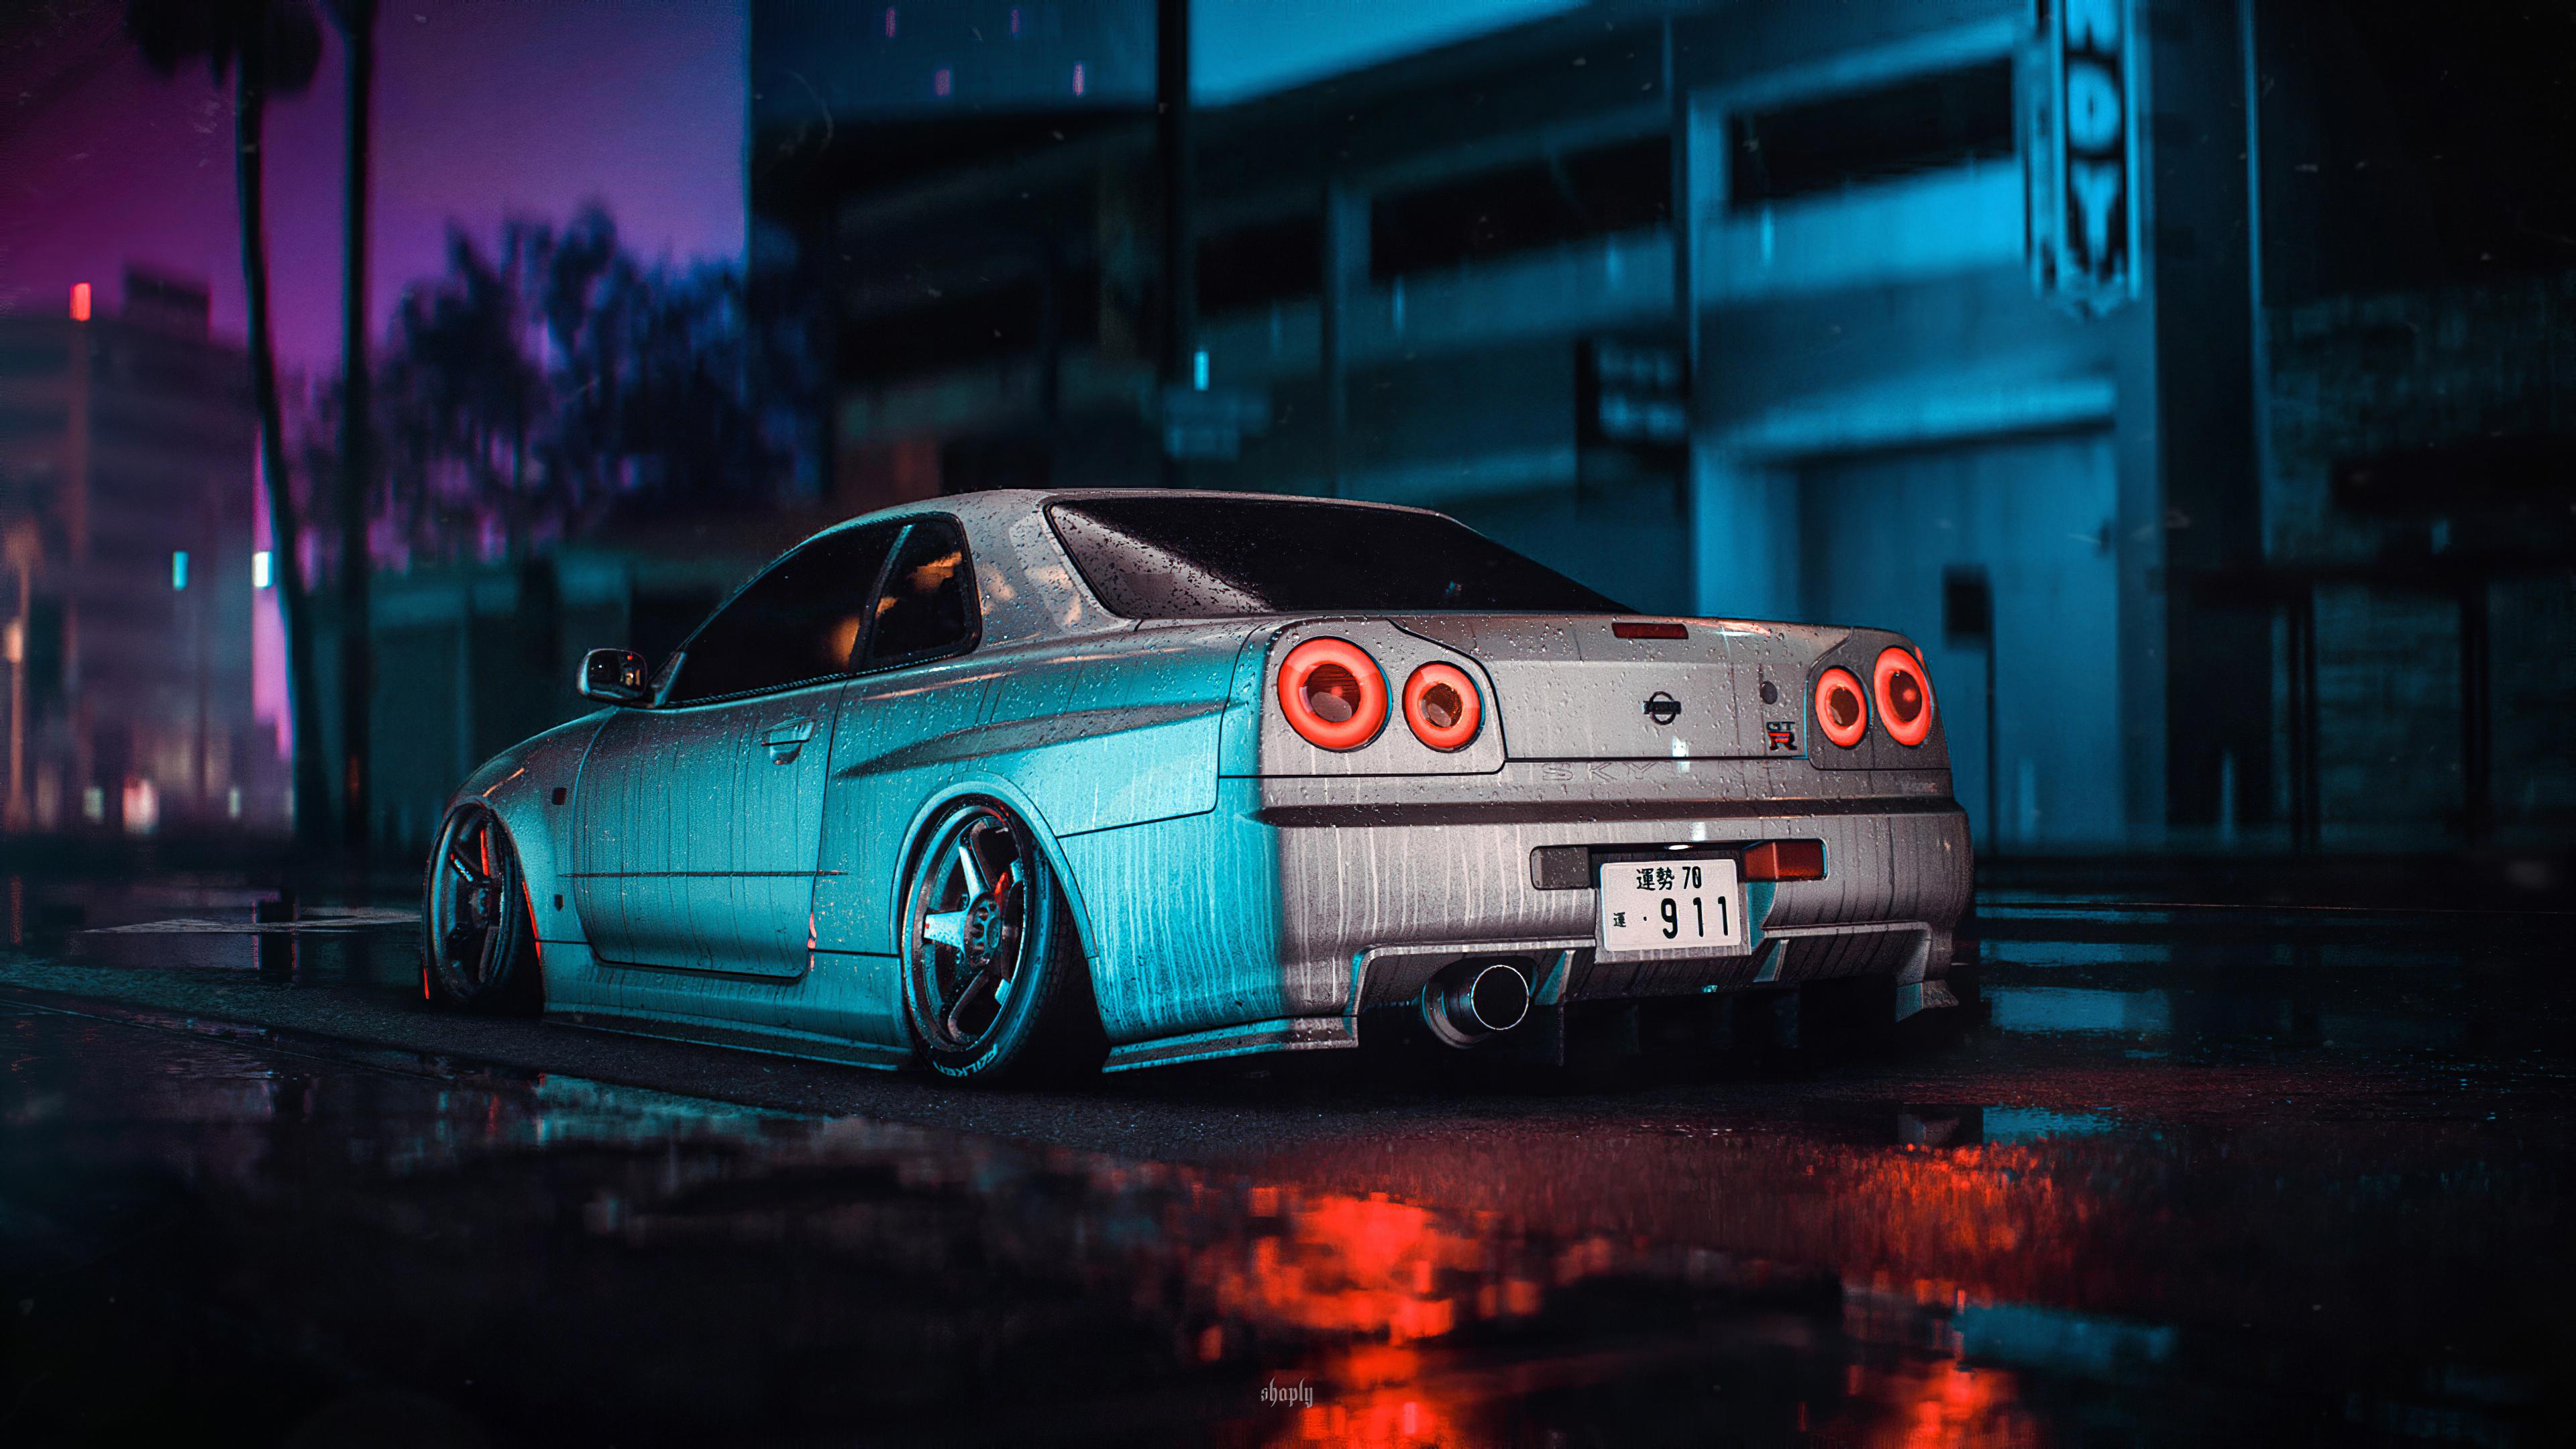 Best 500 Nissan Pictures HD  Download Free Images on Unsplash